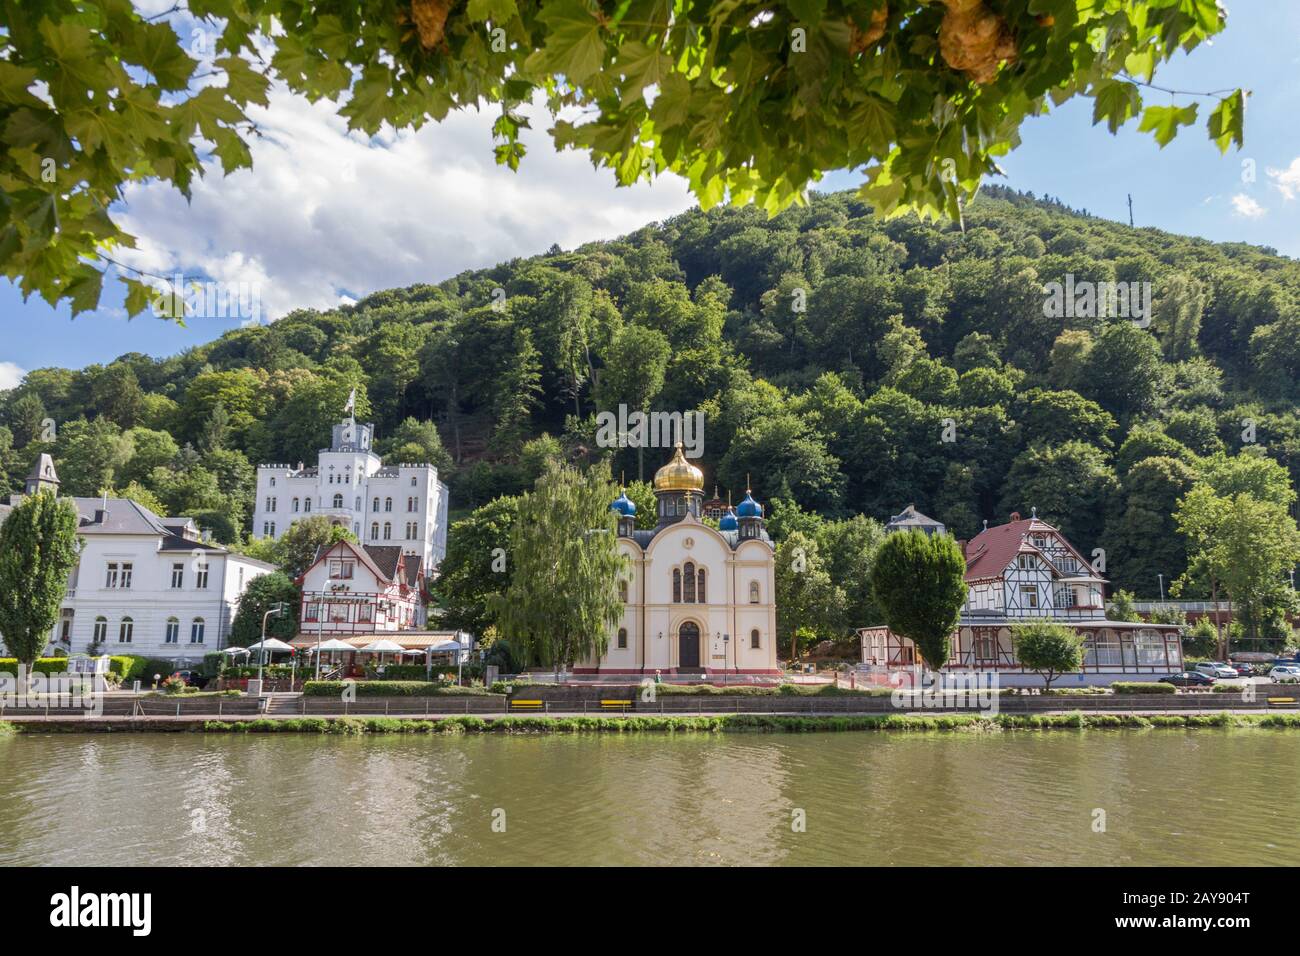 View of the spa town Bad Ems at the river Lahn in Germany with the Russion Orthodox church and Schloss Balmoral in view Stock Photo